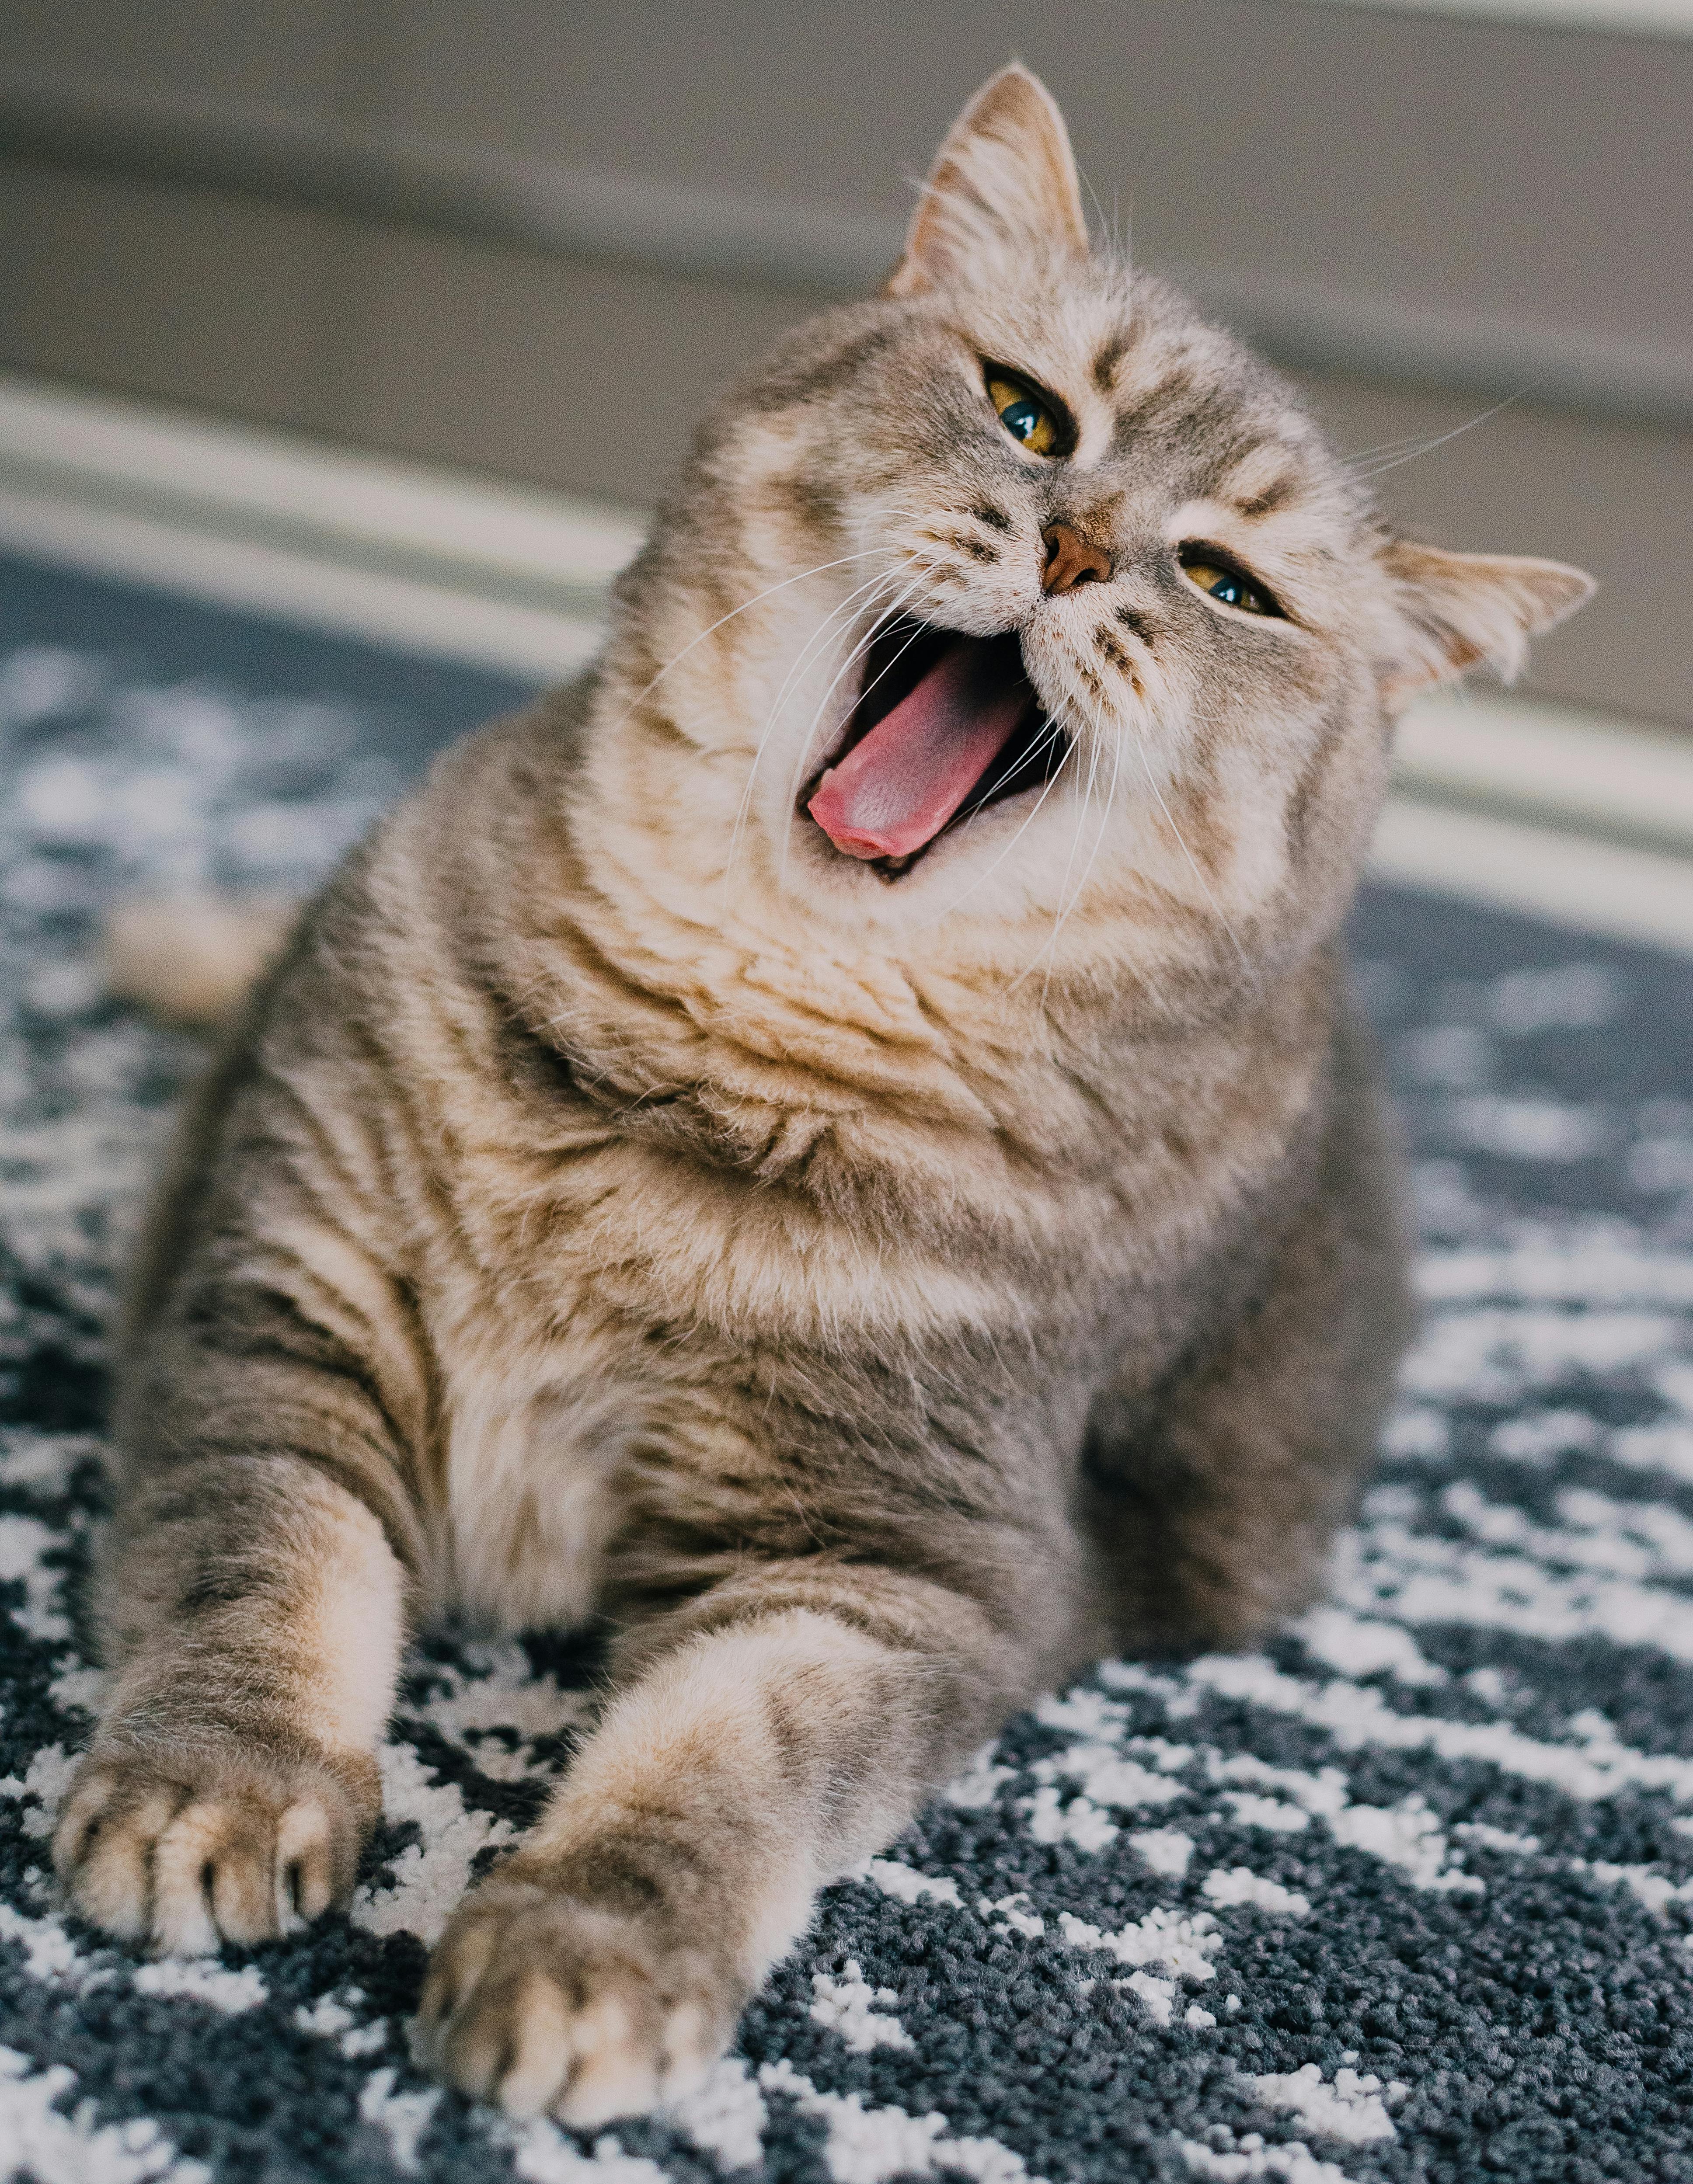 Adorable Fluffy Tabby Cat Yawning while on a Carpet · Free Stock Photo